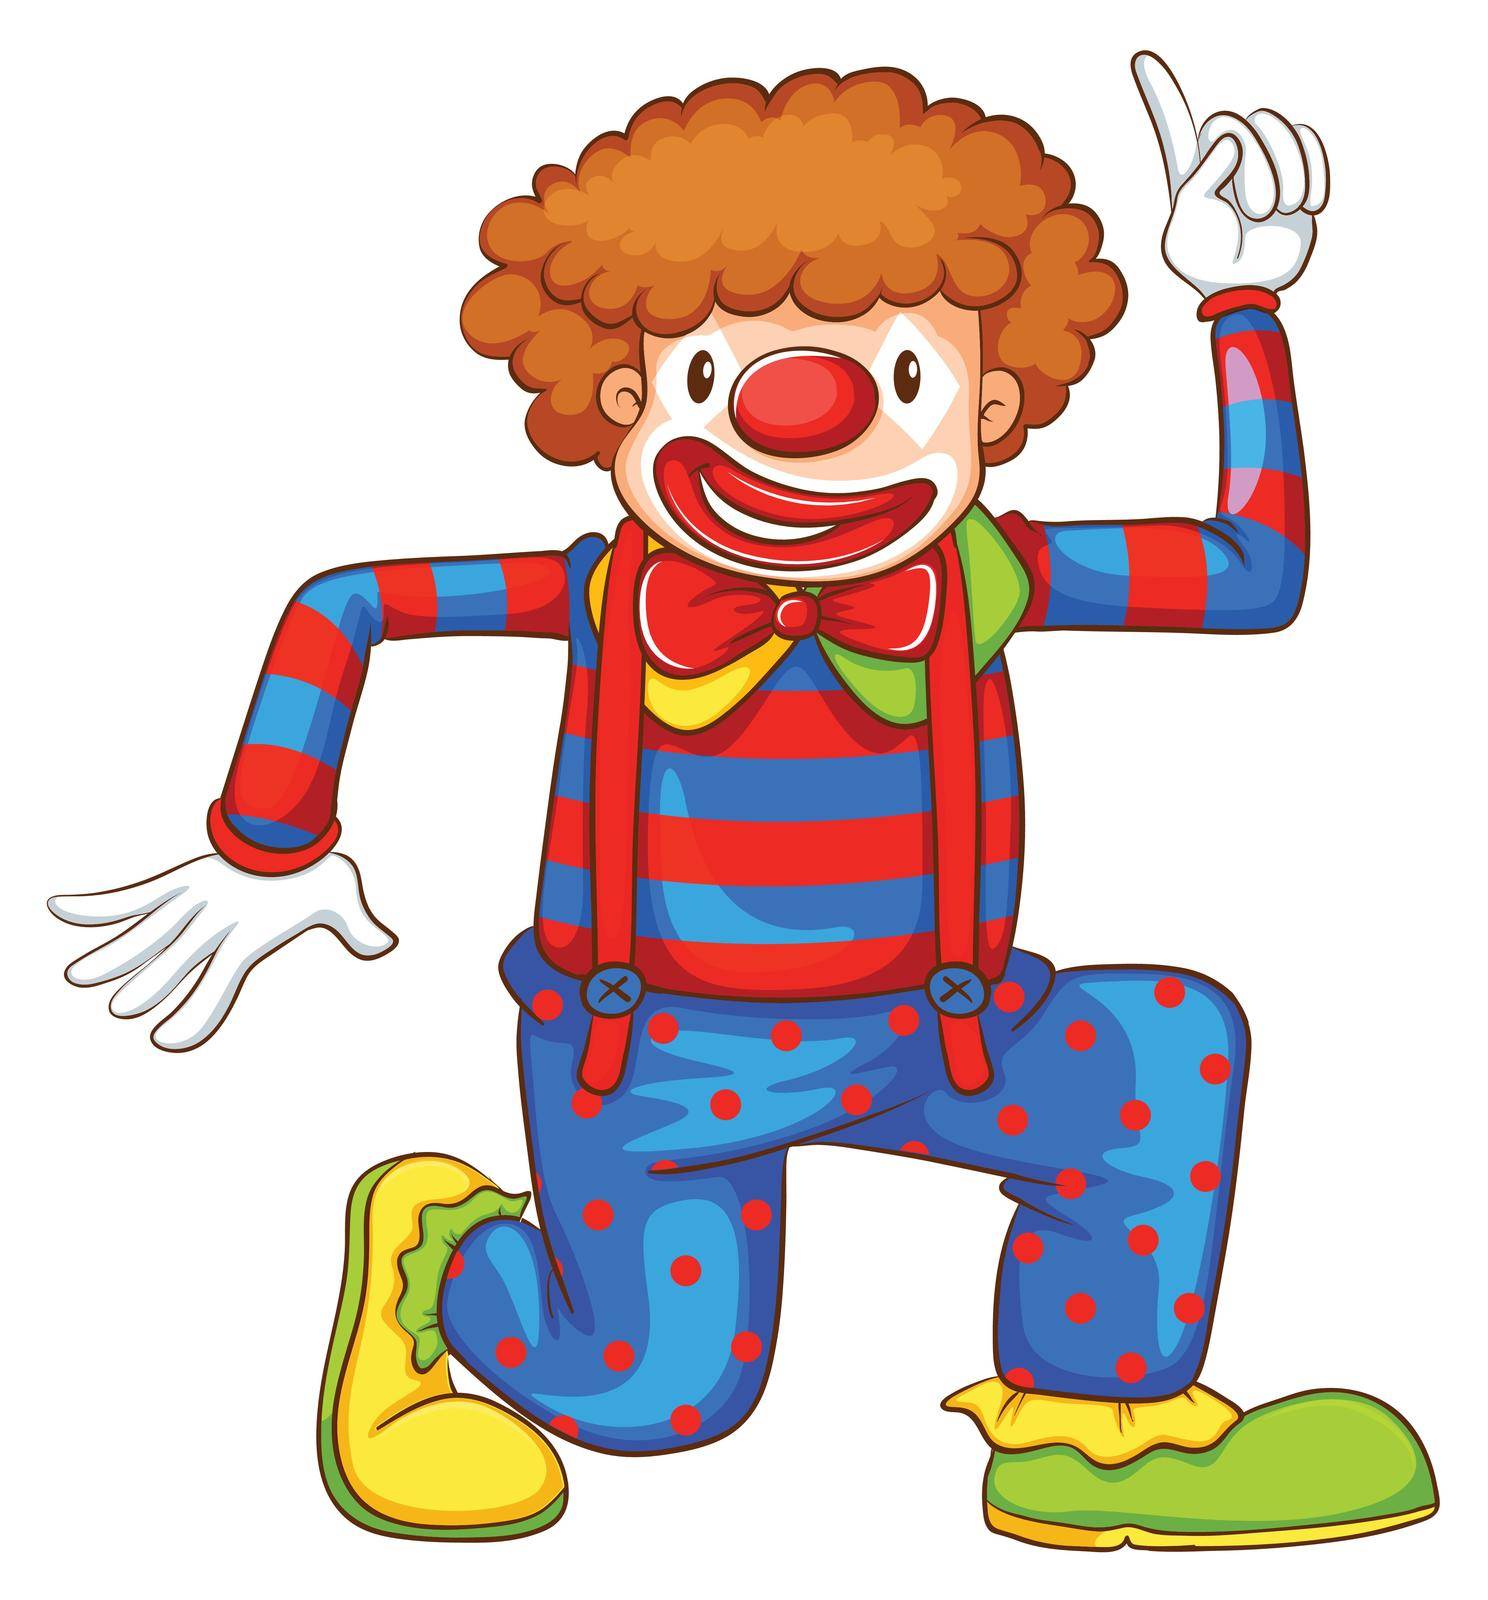 Illustration of a coloured drawing of a clown on a white background